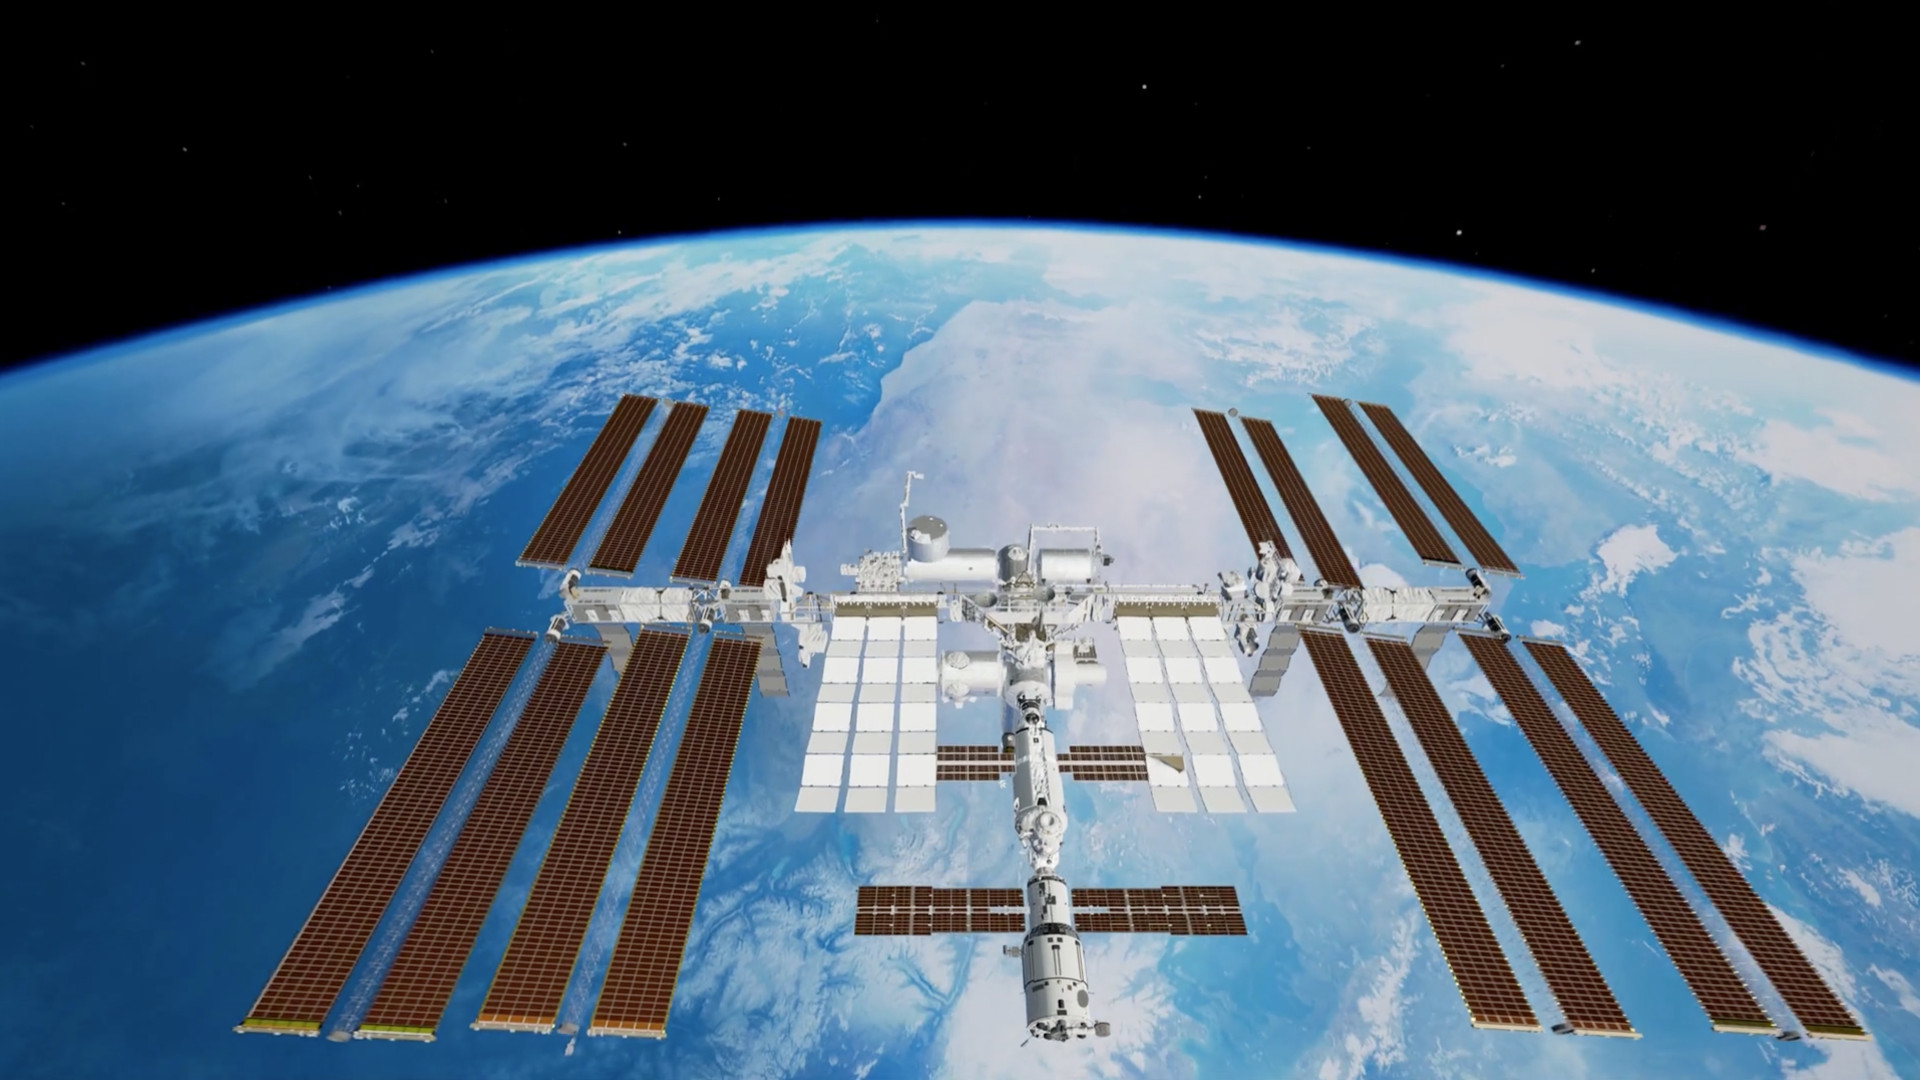 NASA tracked dangerous space debris close to the International Space Station in November.